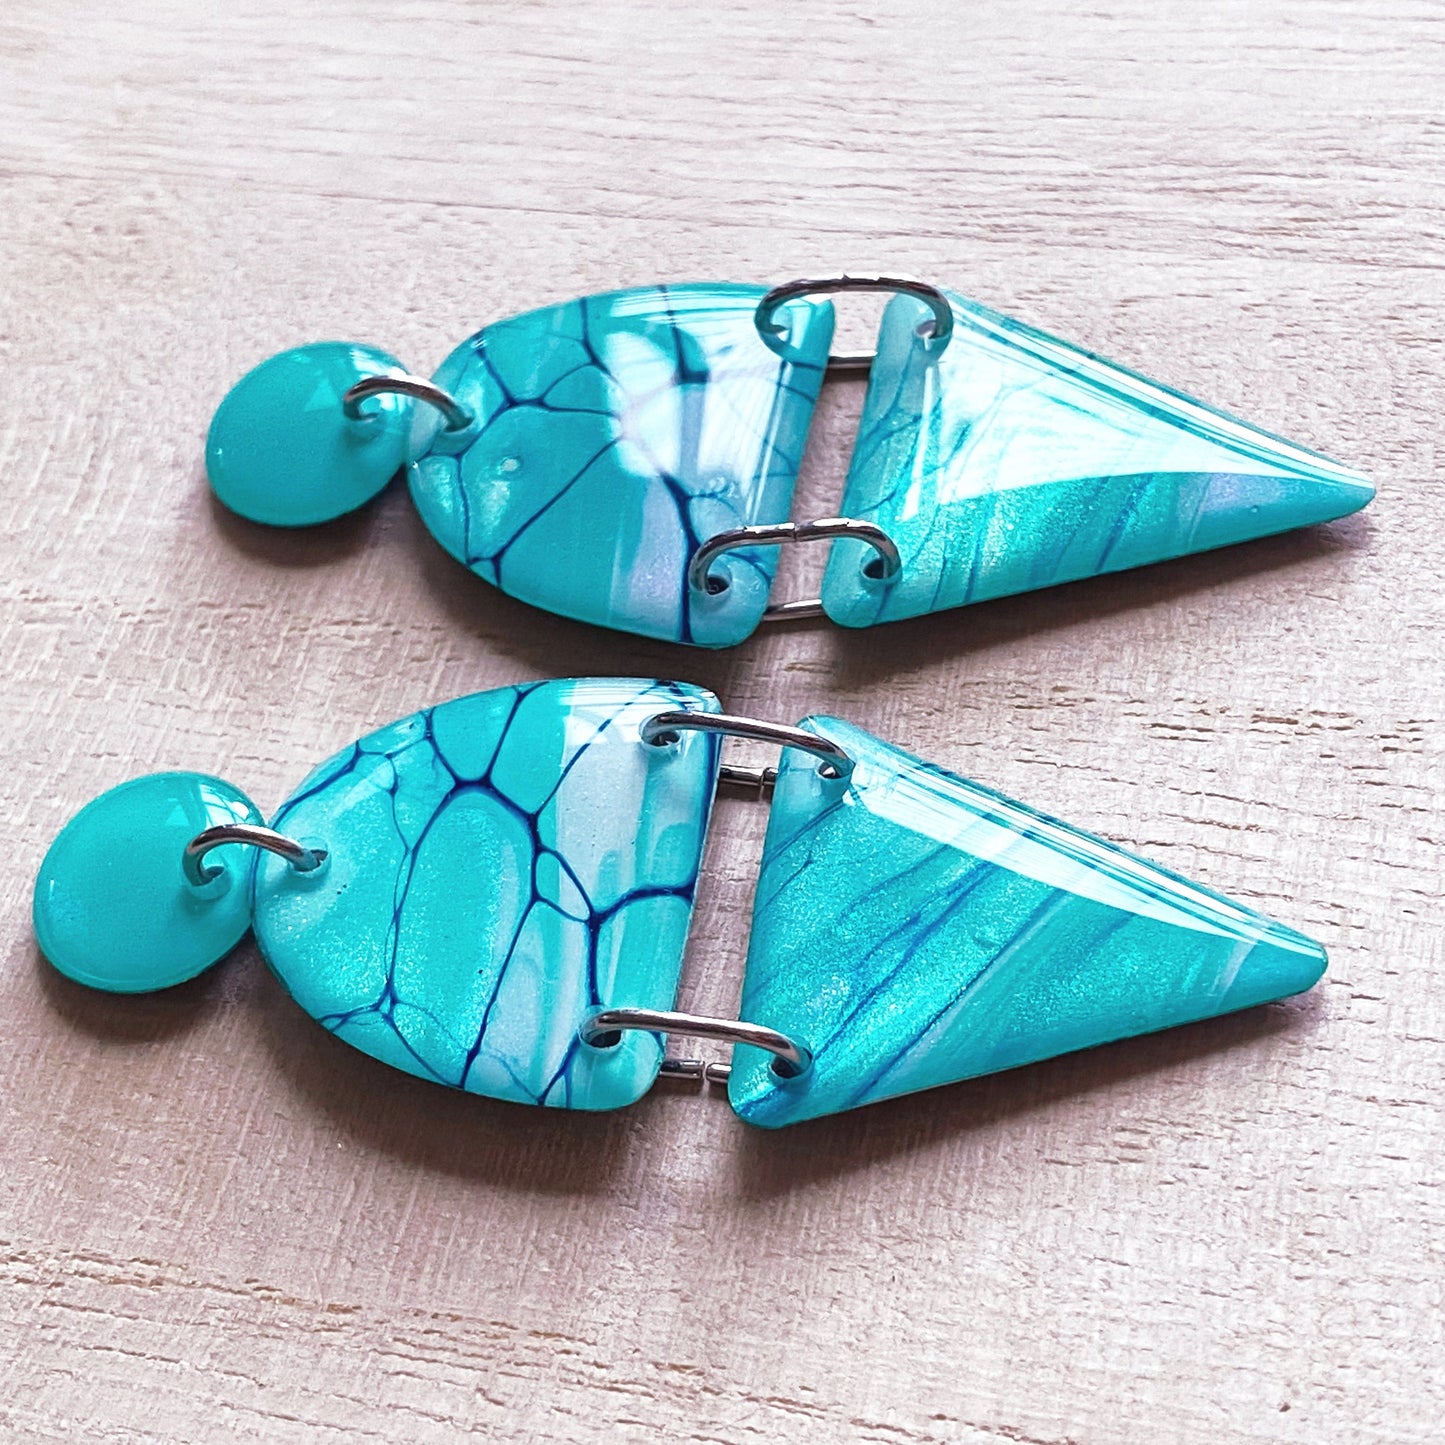 Lacroz Creations Earrings Turquoise Triangle Arch Dangle Earrings